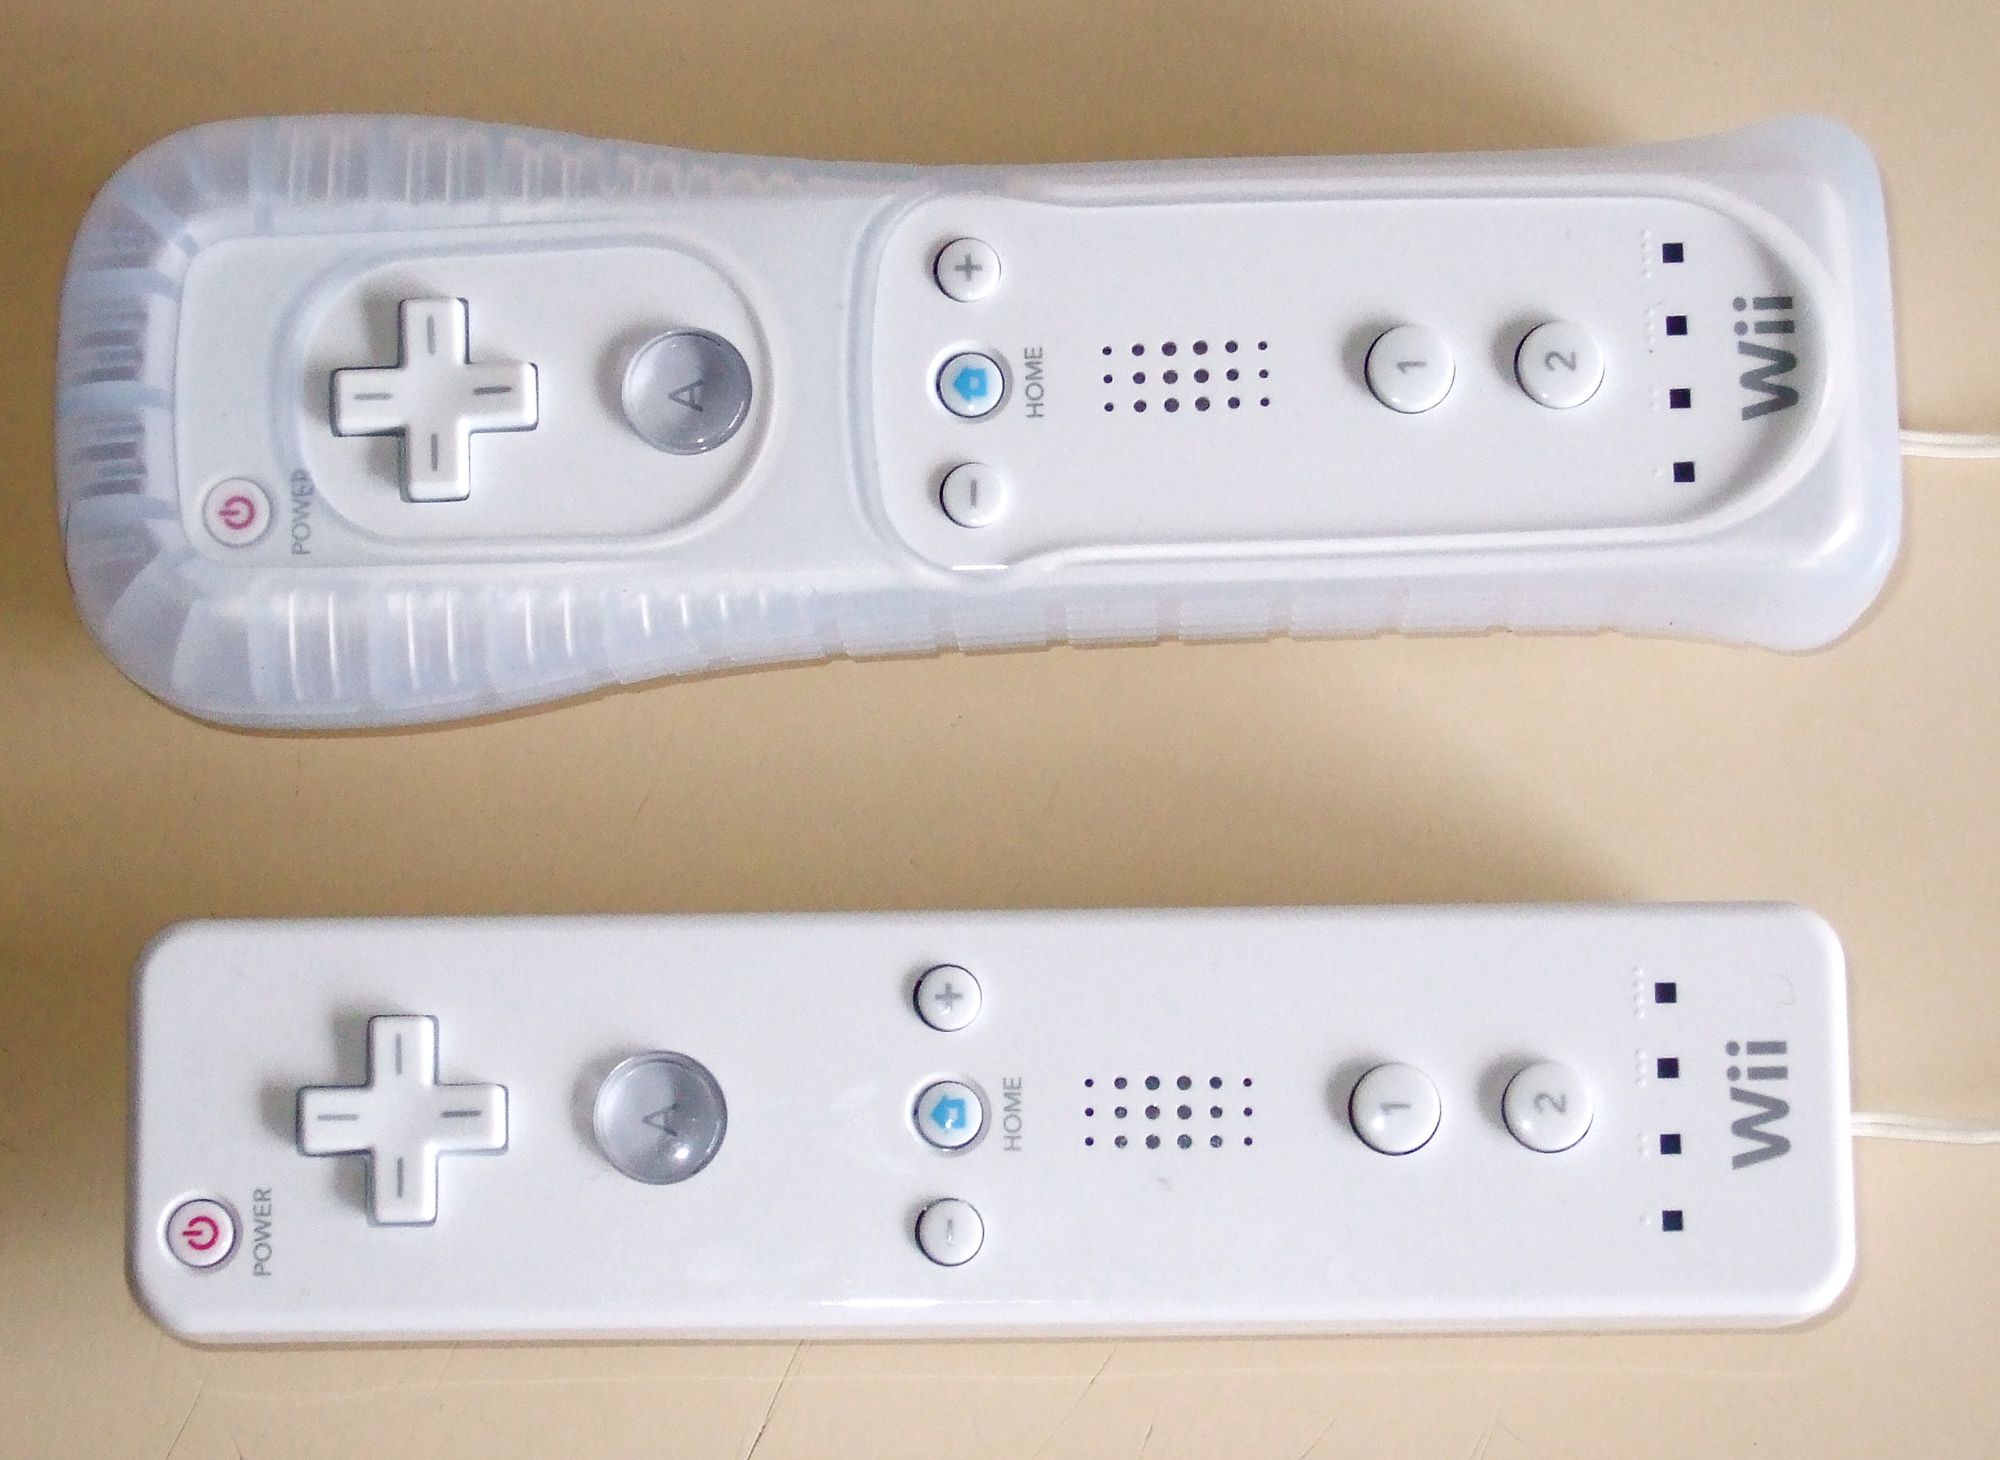 Whiteboards to Sex Toys - Ten Unusual Uses for a Wii Remote